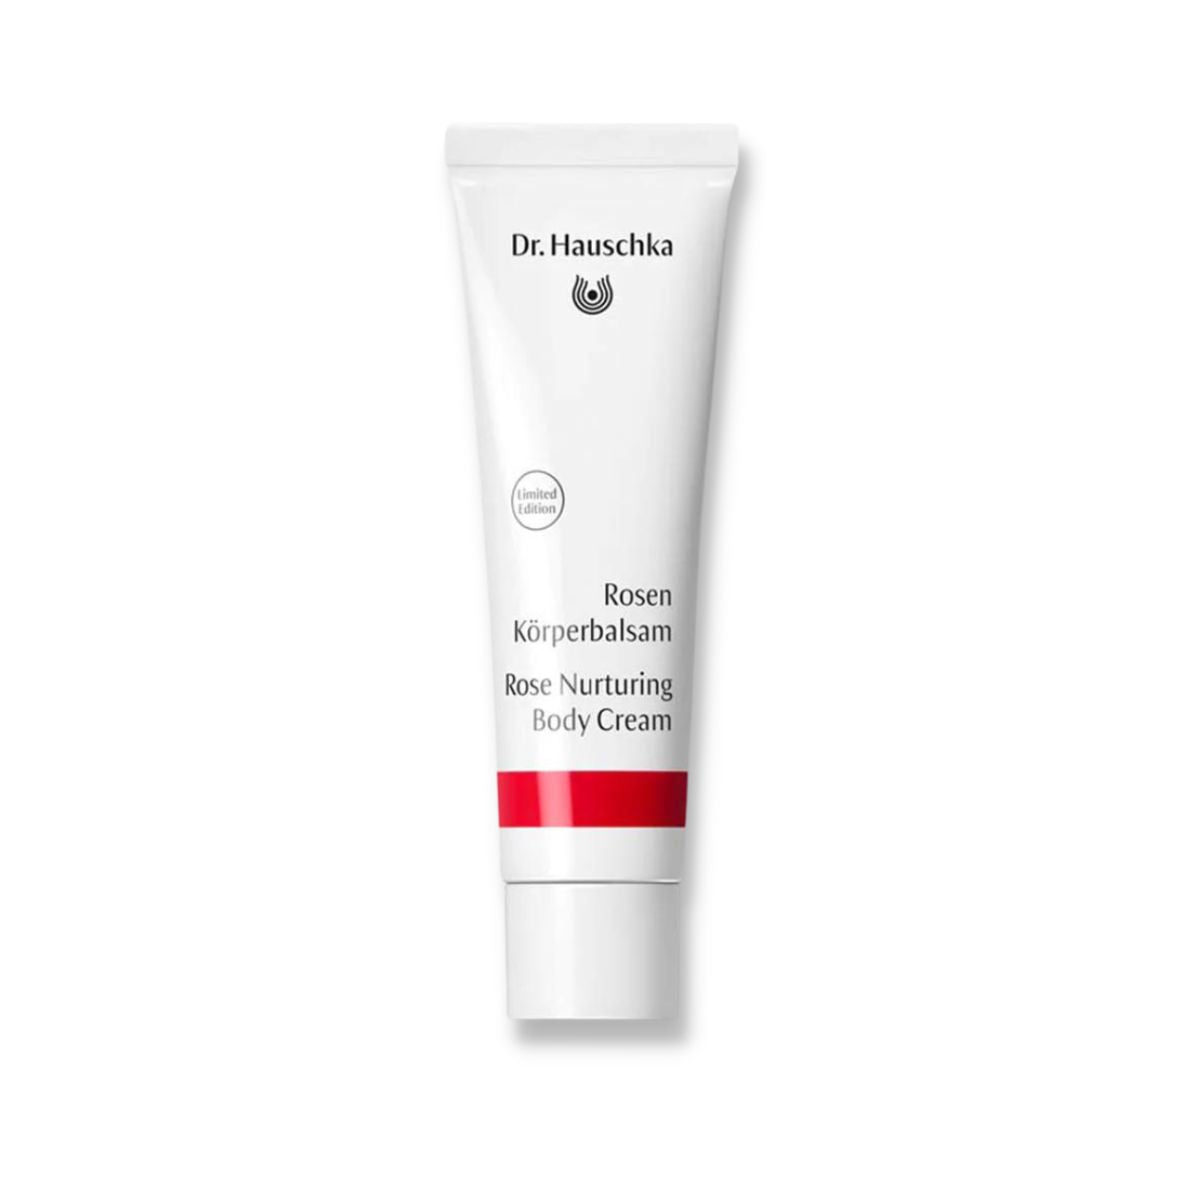 Free Dr Hauschka Rose Body Cream 30ml with every Dr Hauschka purchase. One Gift per person while stocks last.